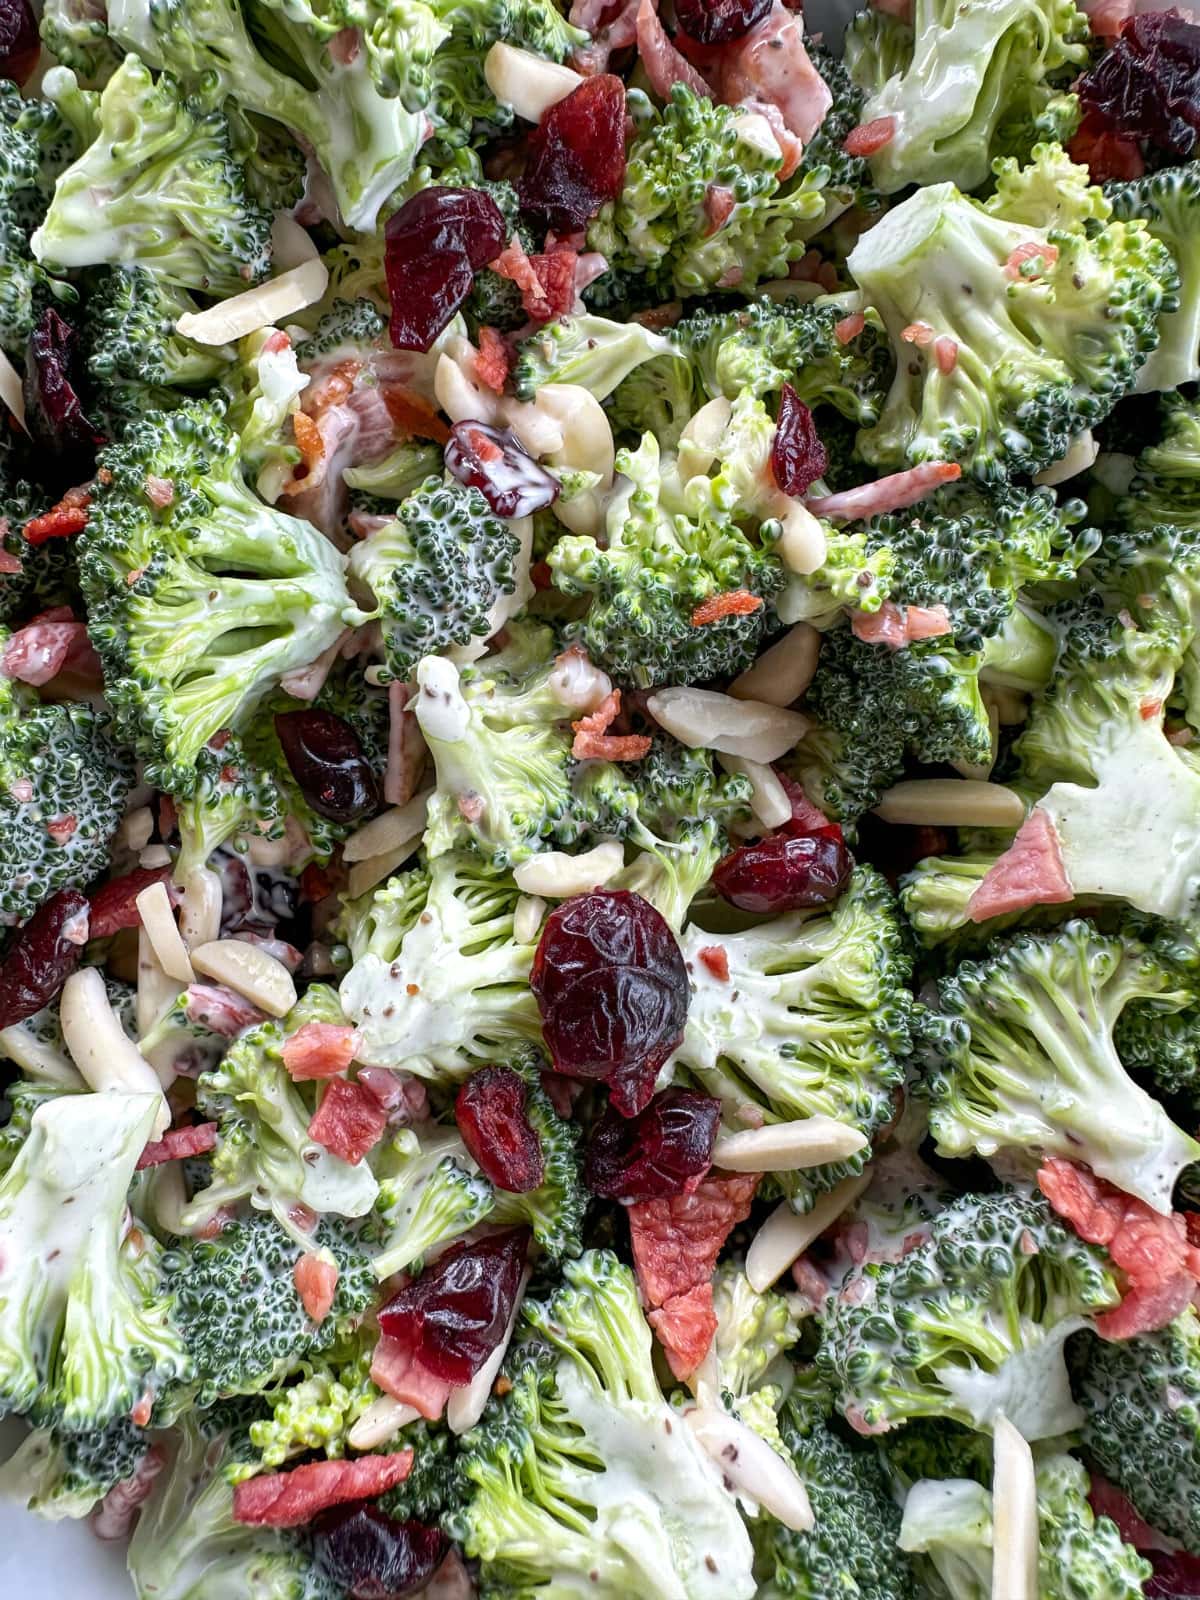 Closes up photograph showing creamy broccoli salad with cranberries and almonds, crispy bacon and a creamy coleslaw dressing